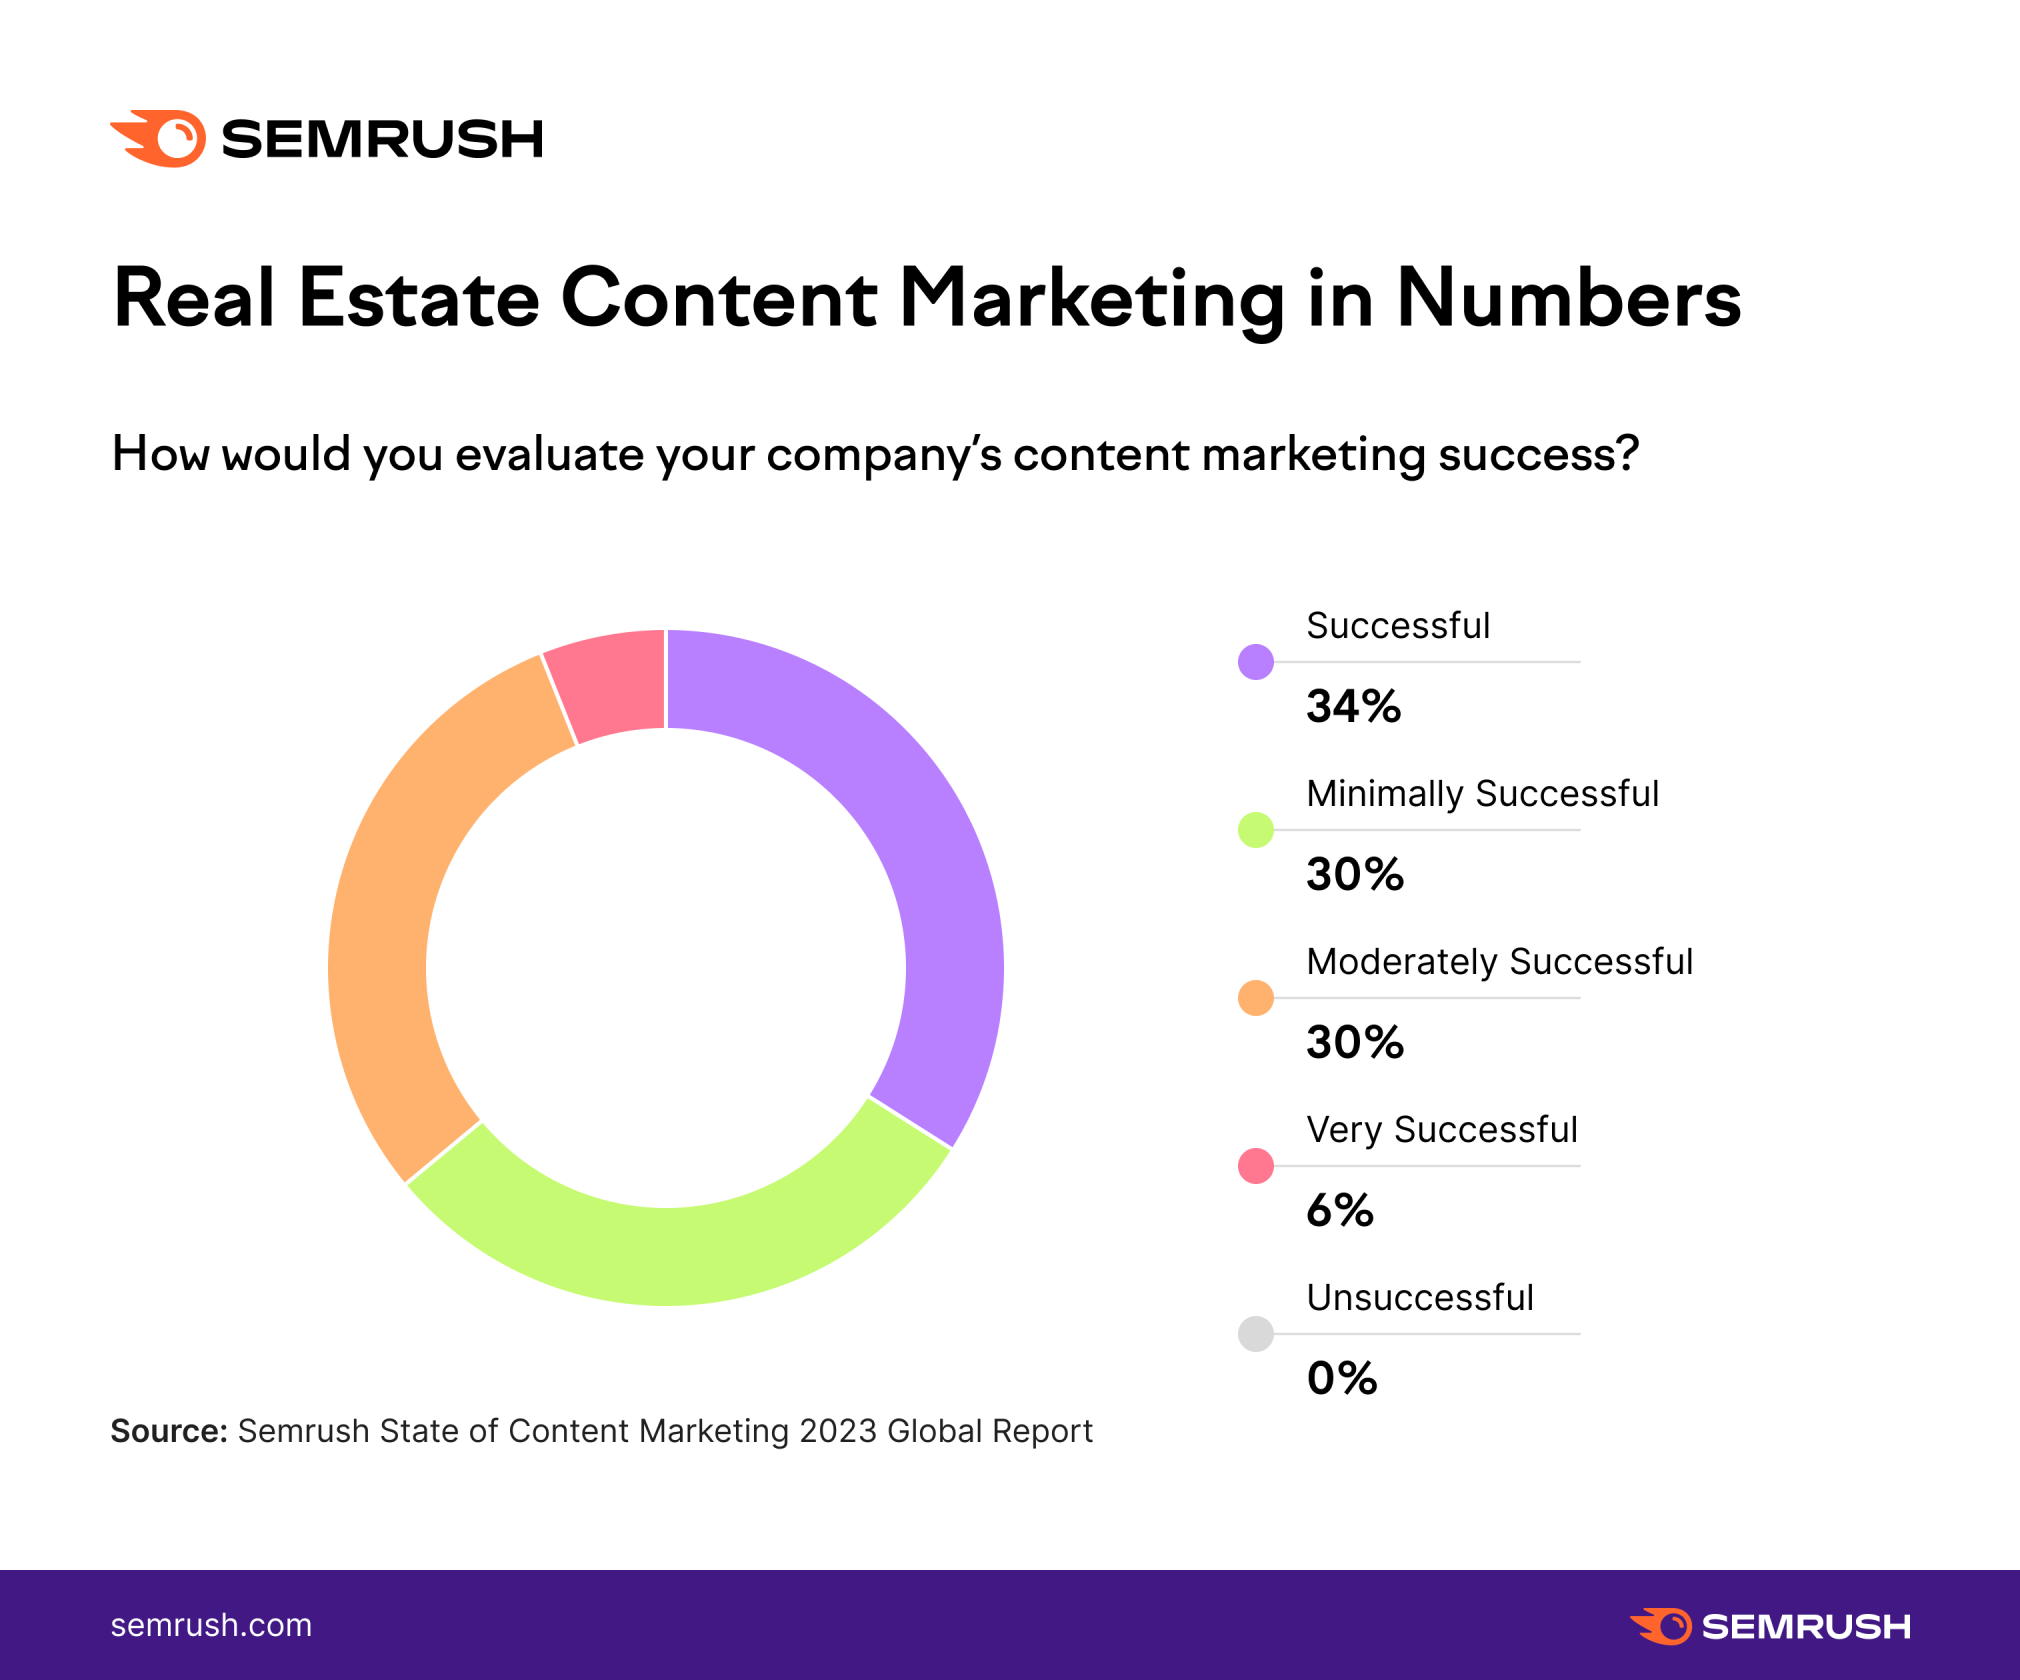 Real estate content marketing in 2023